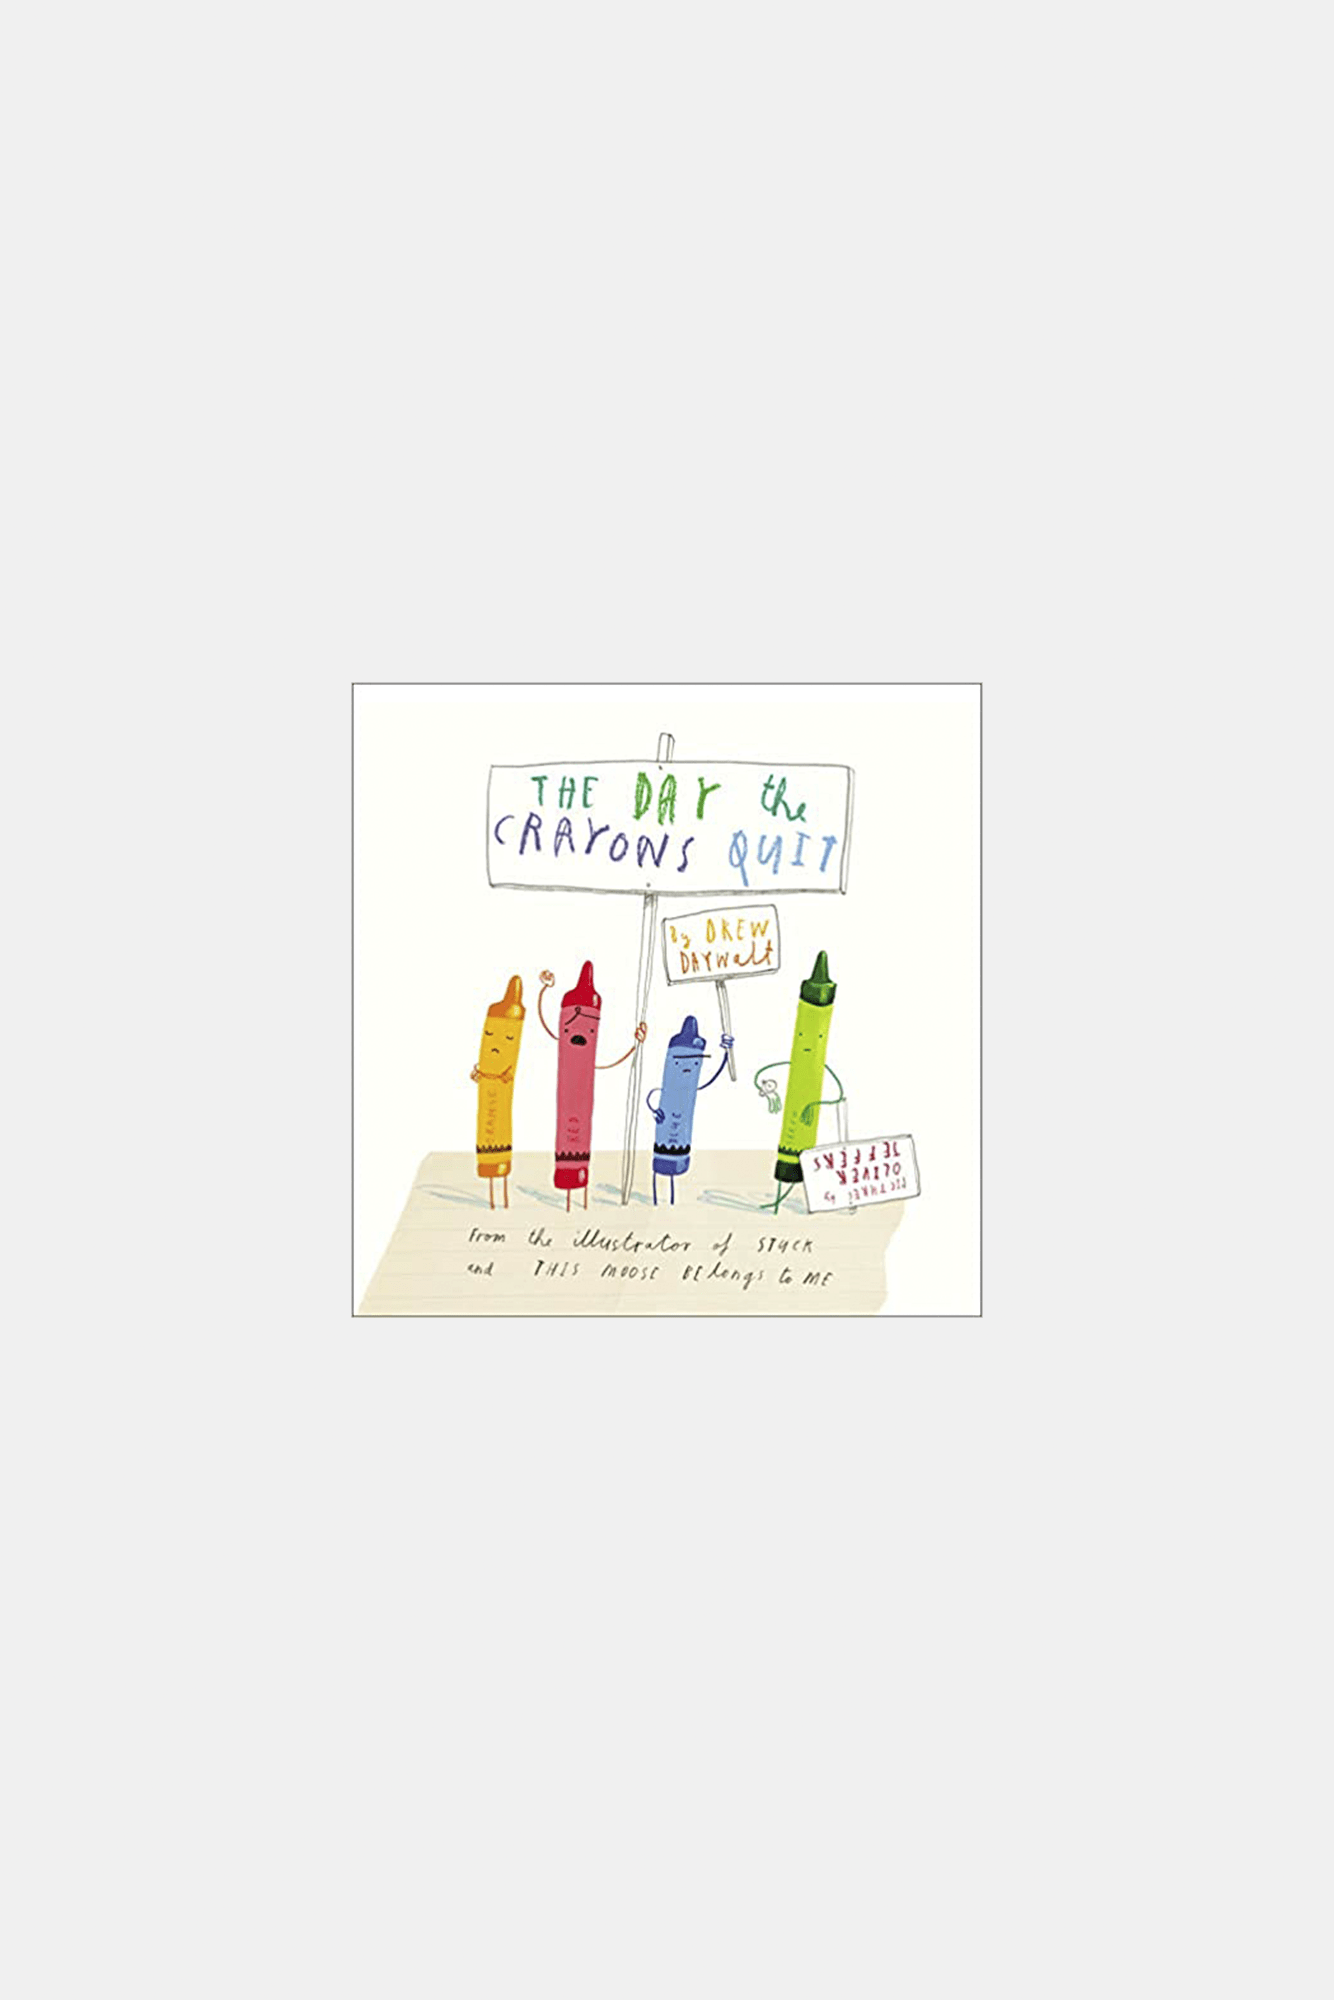 Ingram Content Book The Day the Crayons Quit Hardback